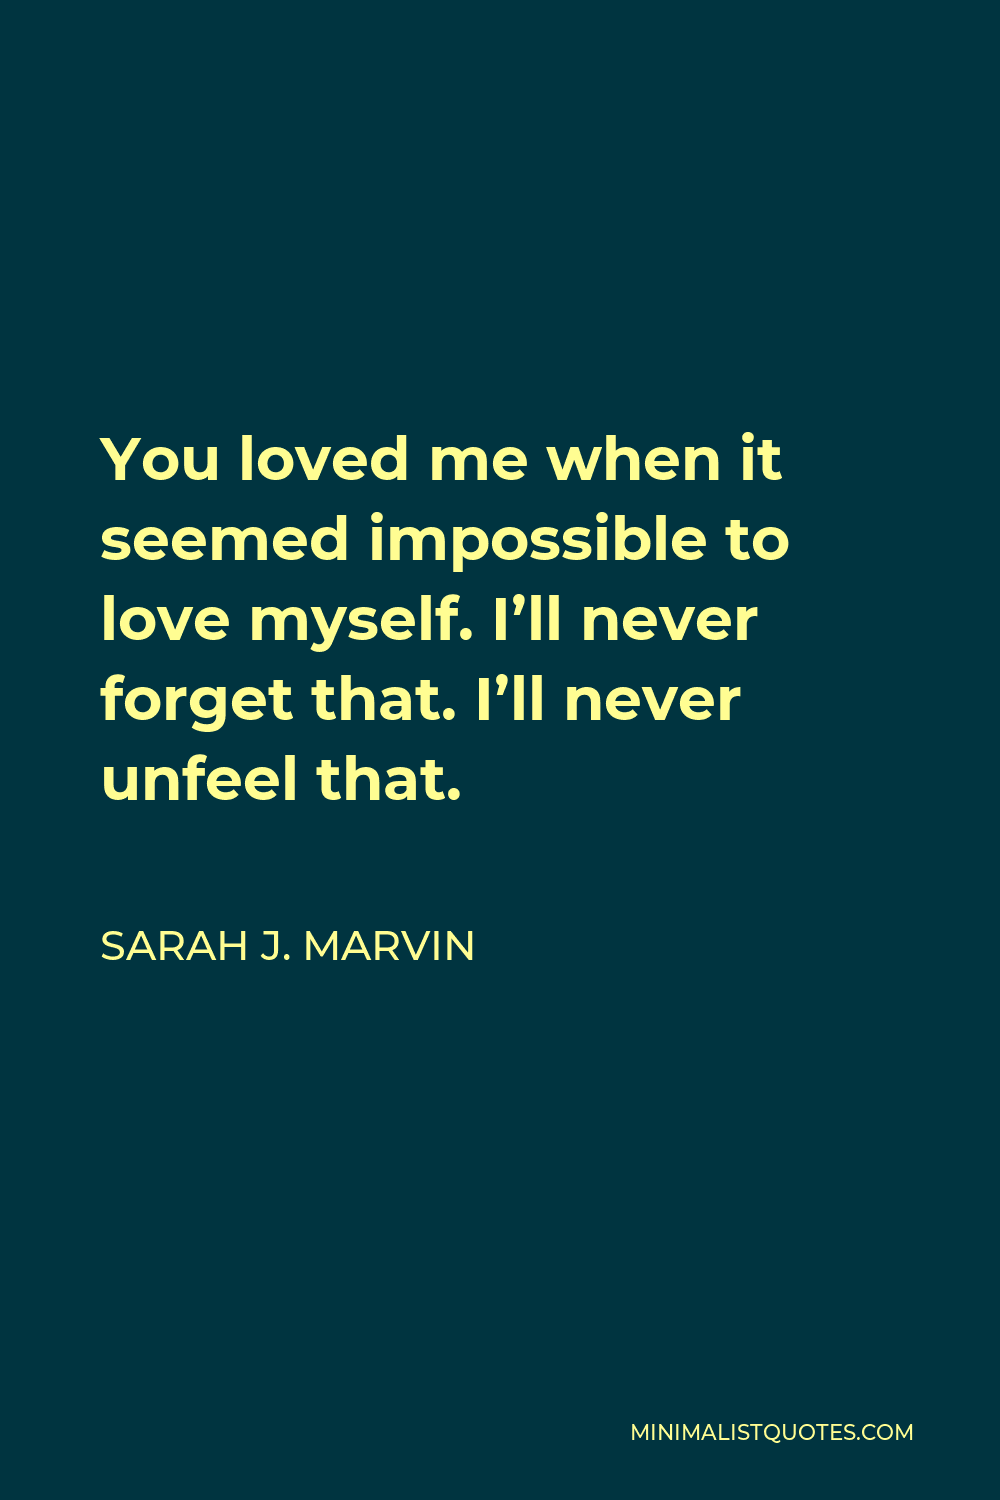 Sarah J. Marvin Quote - You loved me when it seemed impossible to love myself. I’ll never forget that. I’ll never unfeel that.